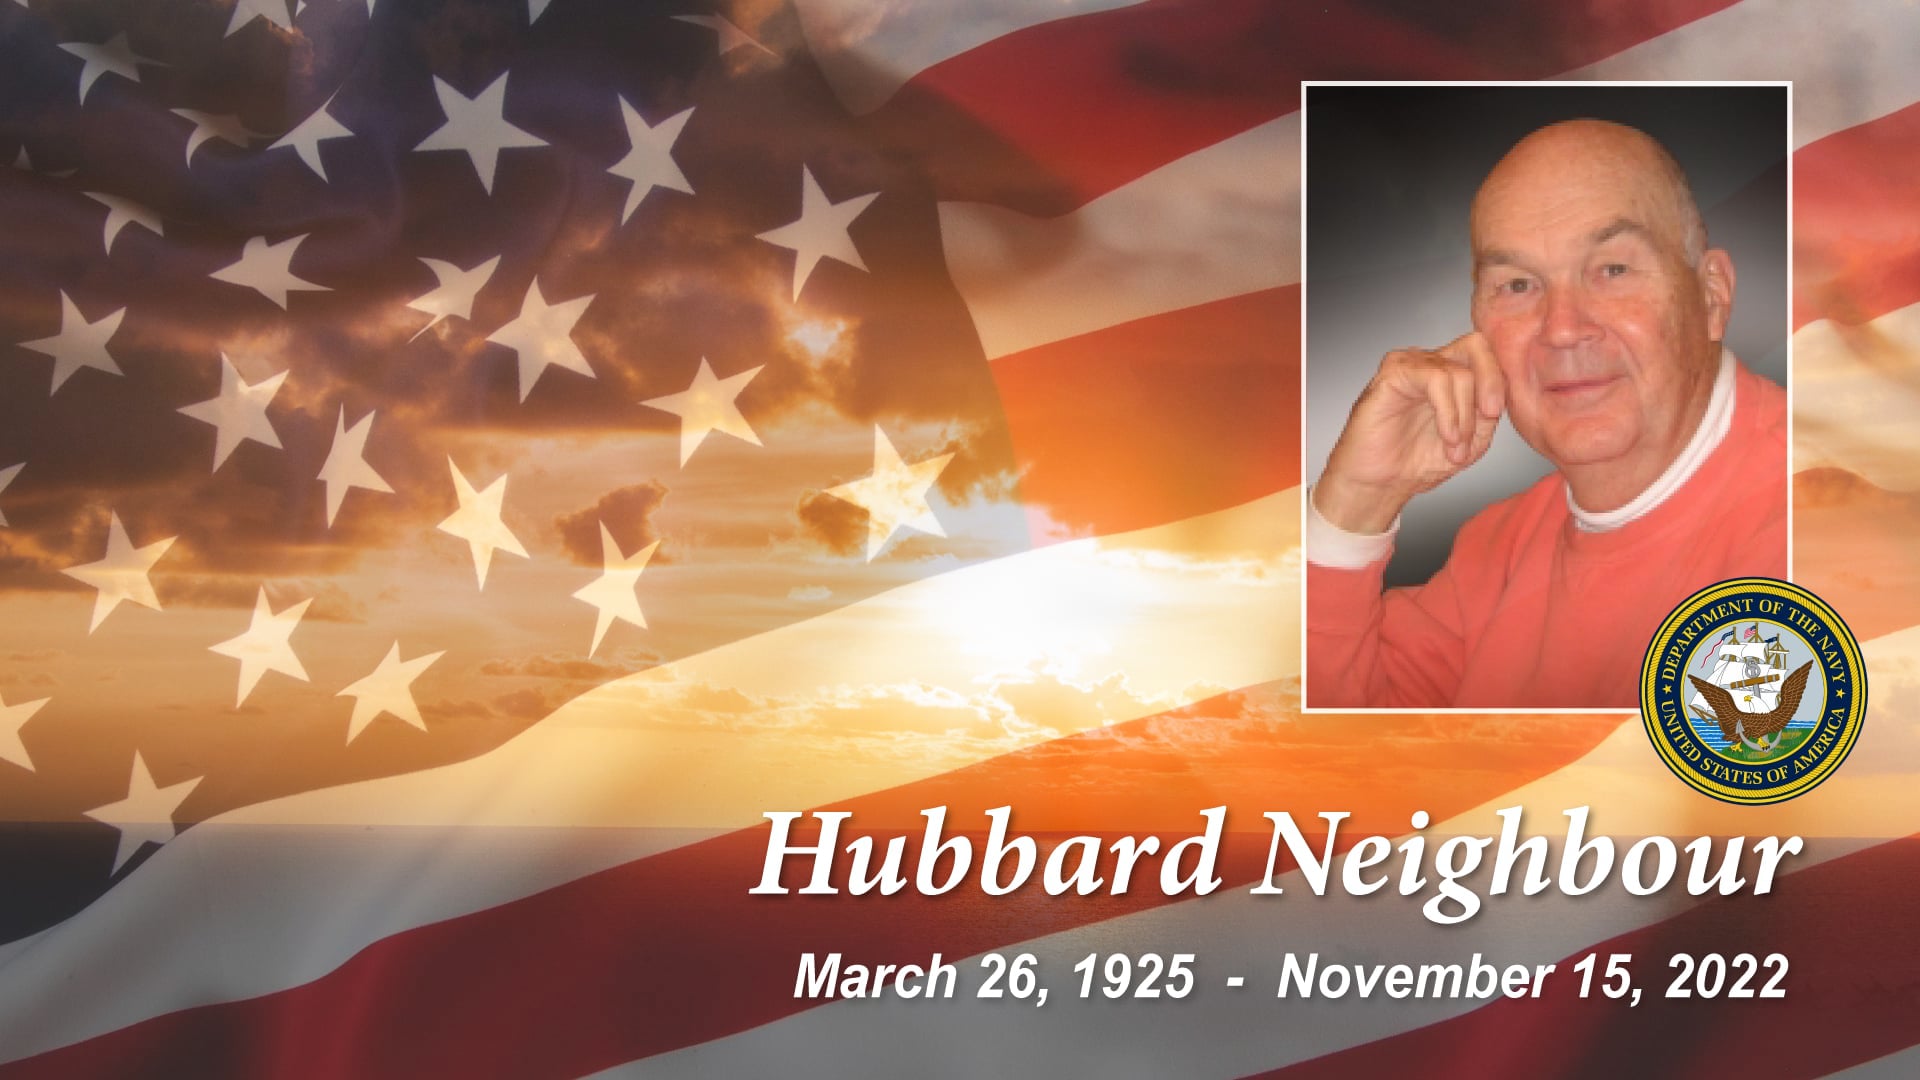 Funeral Service for Hubbard Neighbour